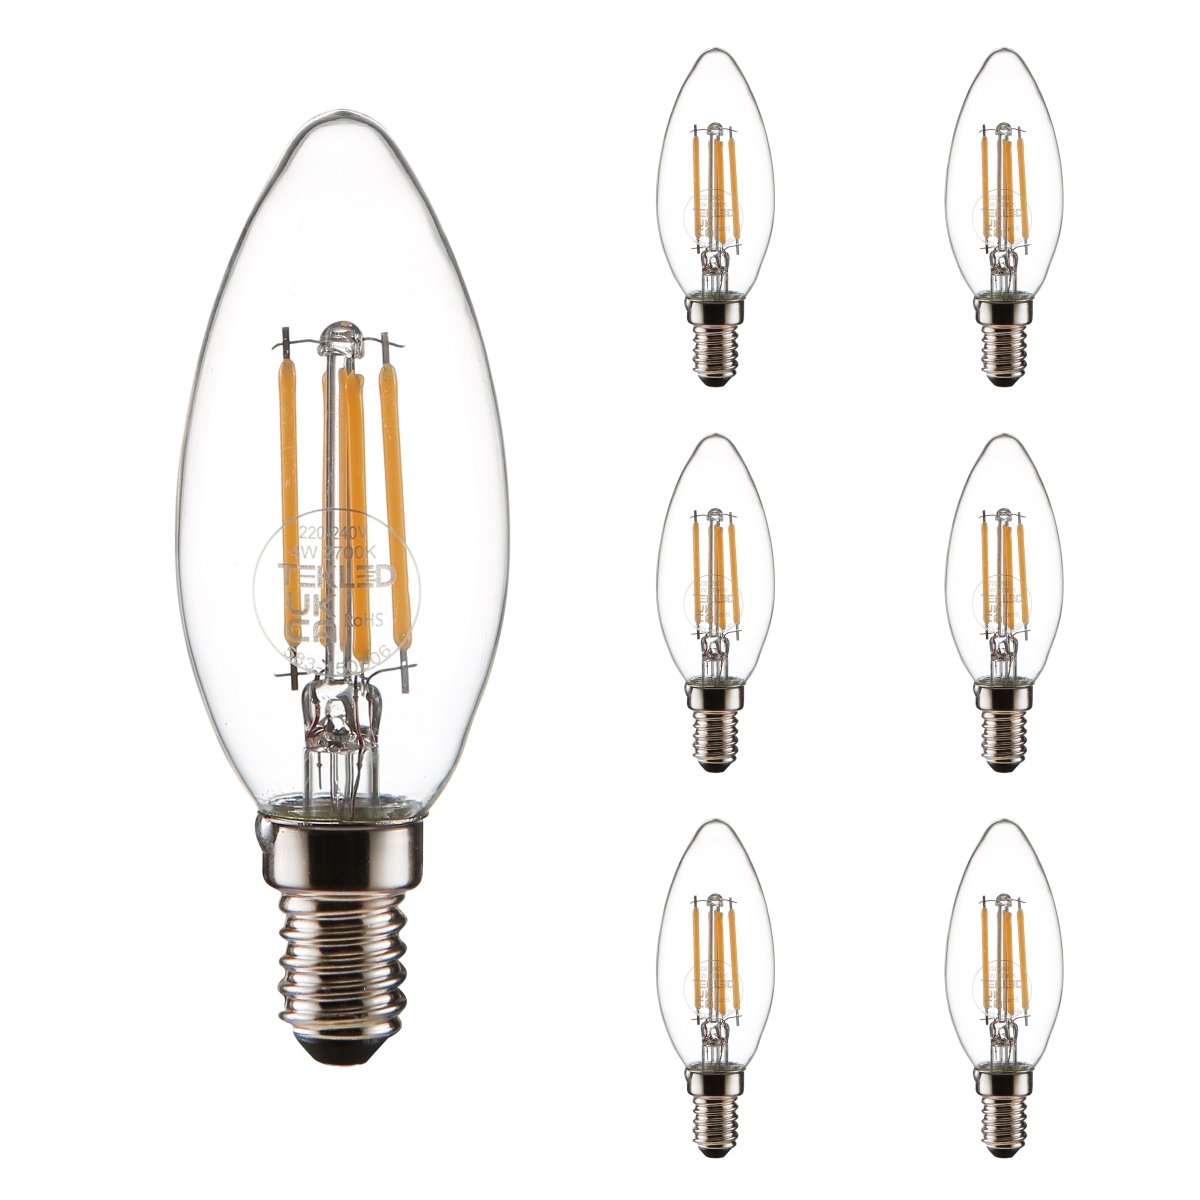 Main image of LED Filament Bulb C35 Candle E14 Small Edison Screw 4W 470lm Cool White 4000K Clear Pack of 6 | TEKLED 583-150606